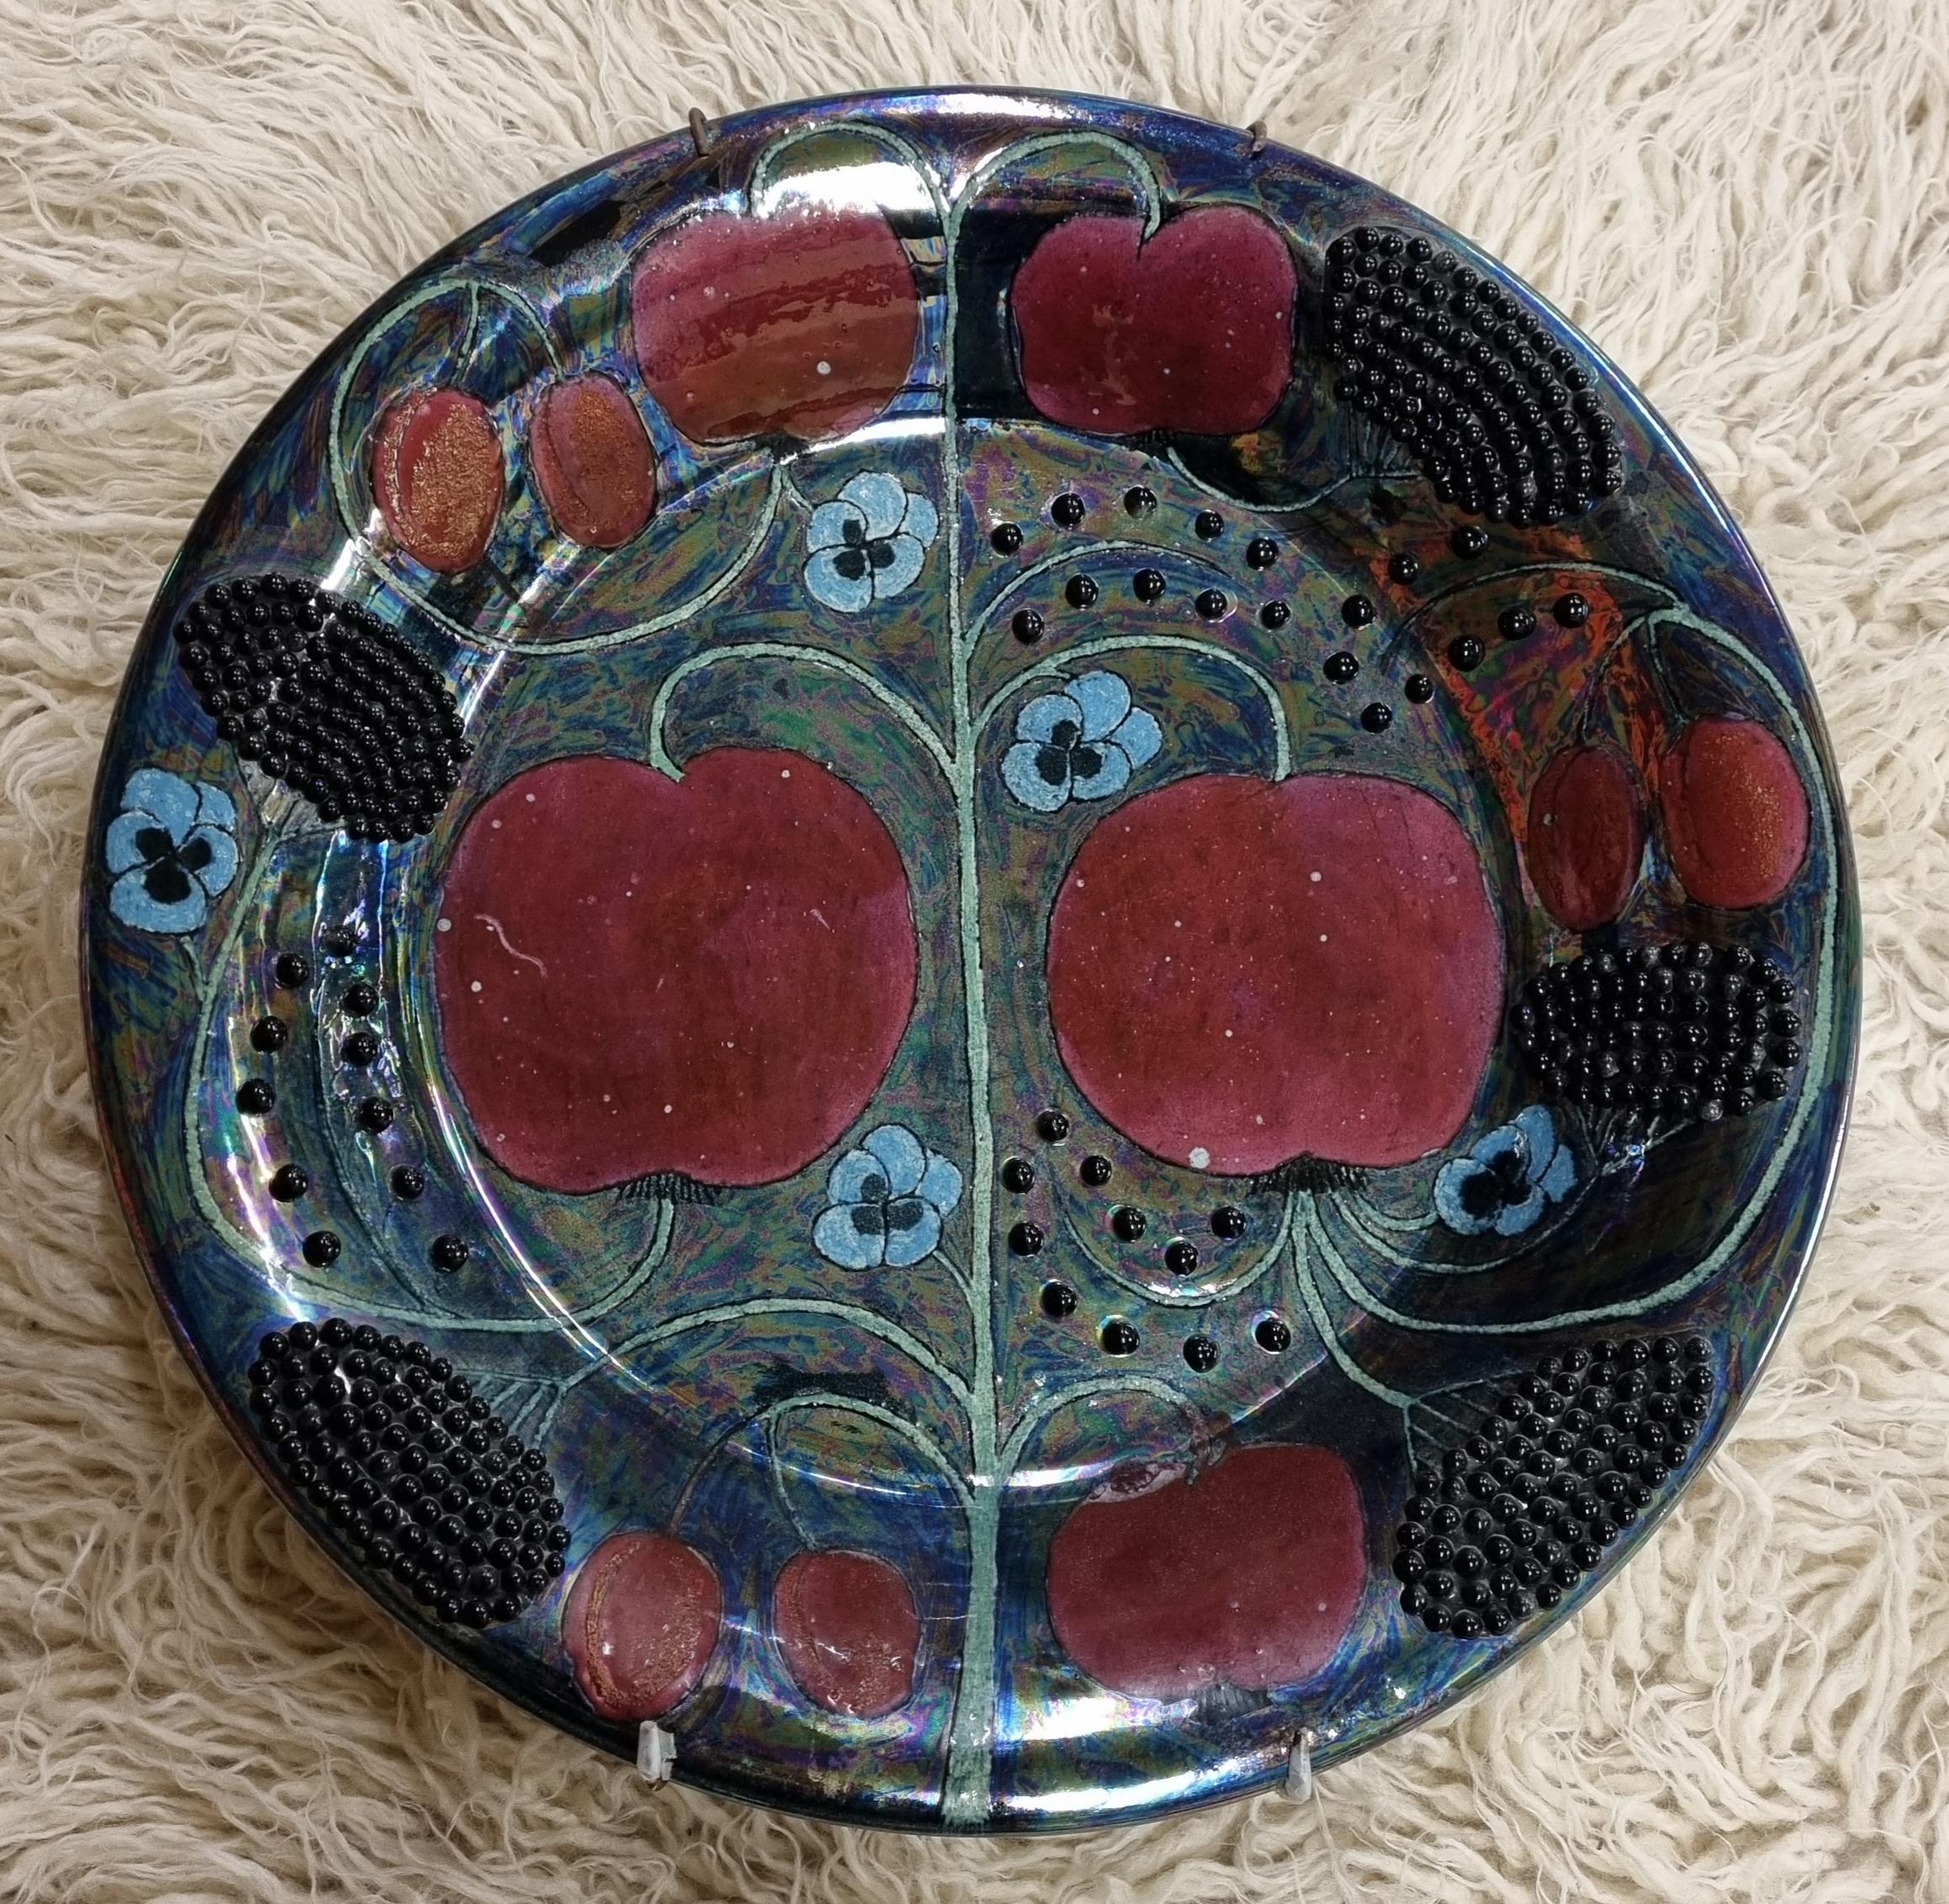 Birger Kaipiainen (1915-1988) was the master of decorative ceramics at the Arabia factory in Finland. He was well known for his ornamental dishes that were rich, colourful and with themes from the fantasy world and fairytales, which actually fought